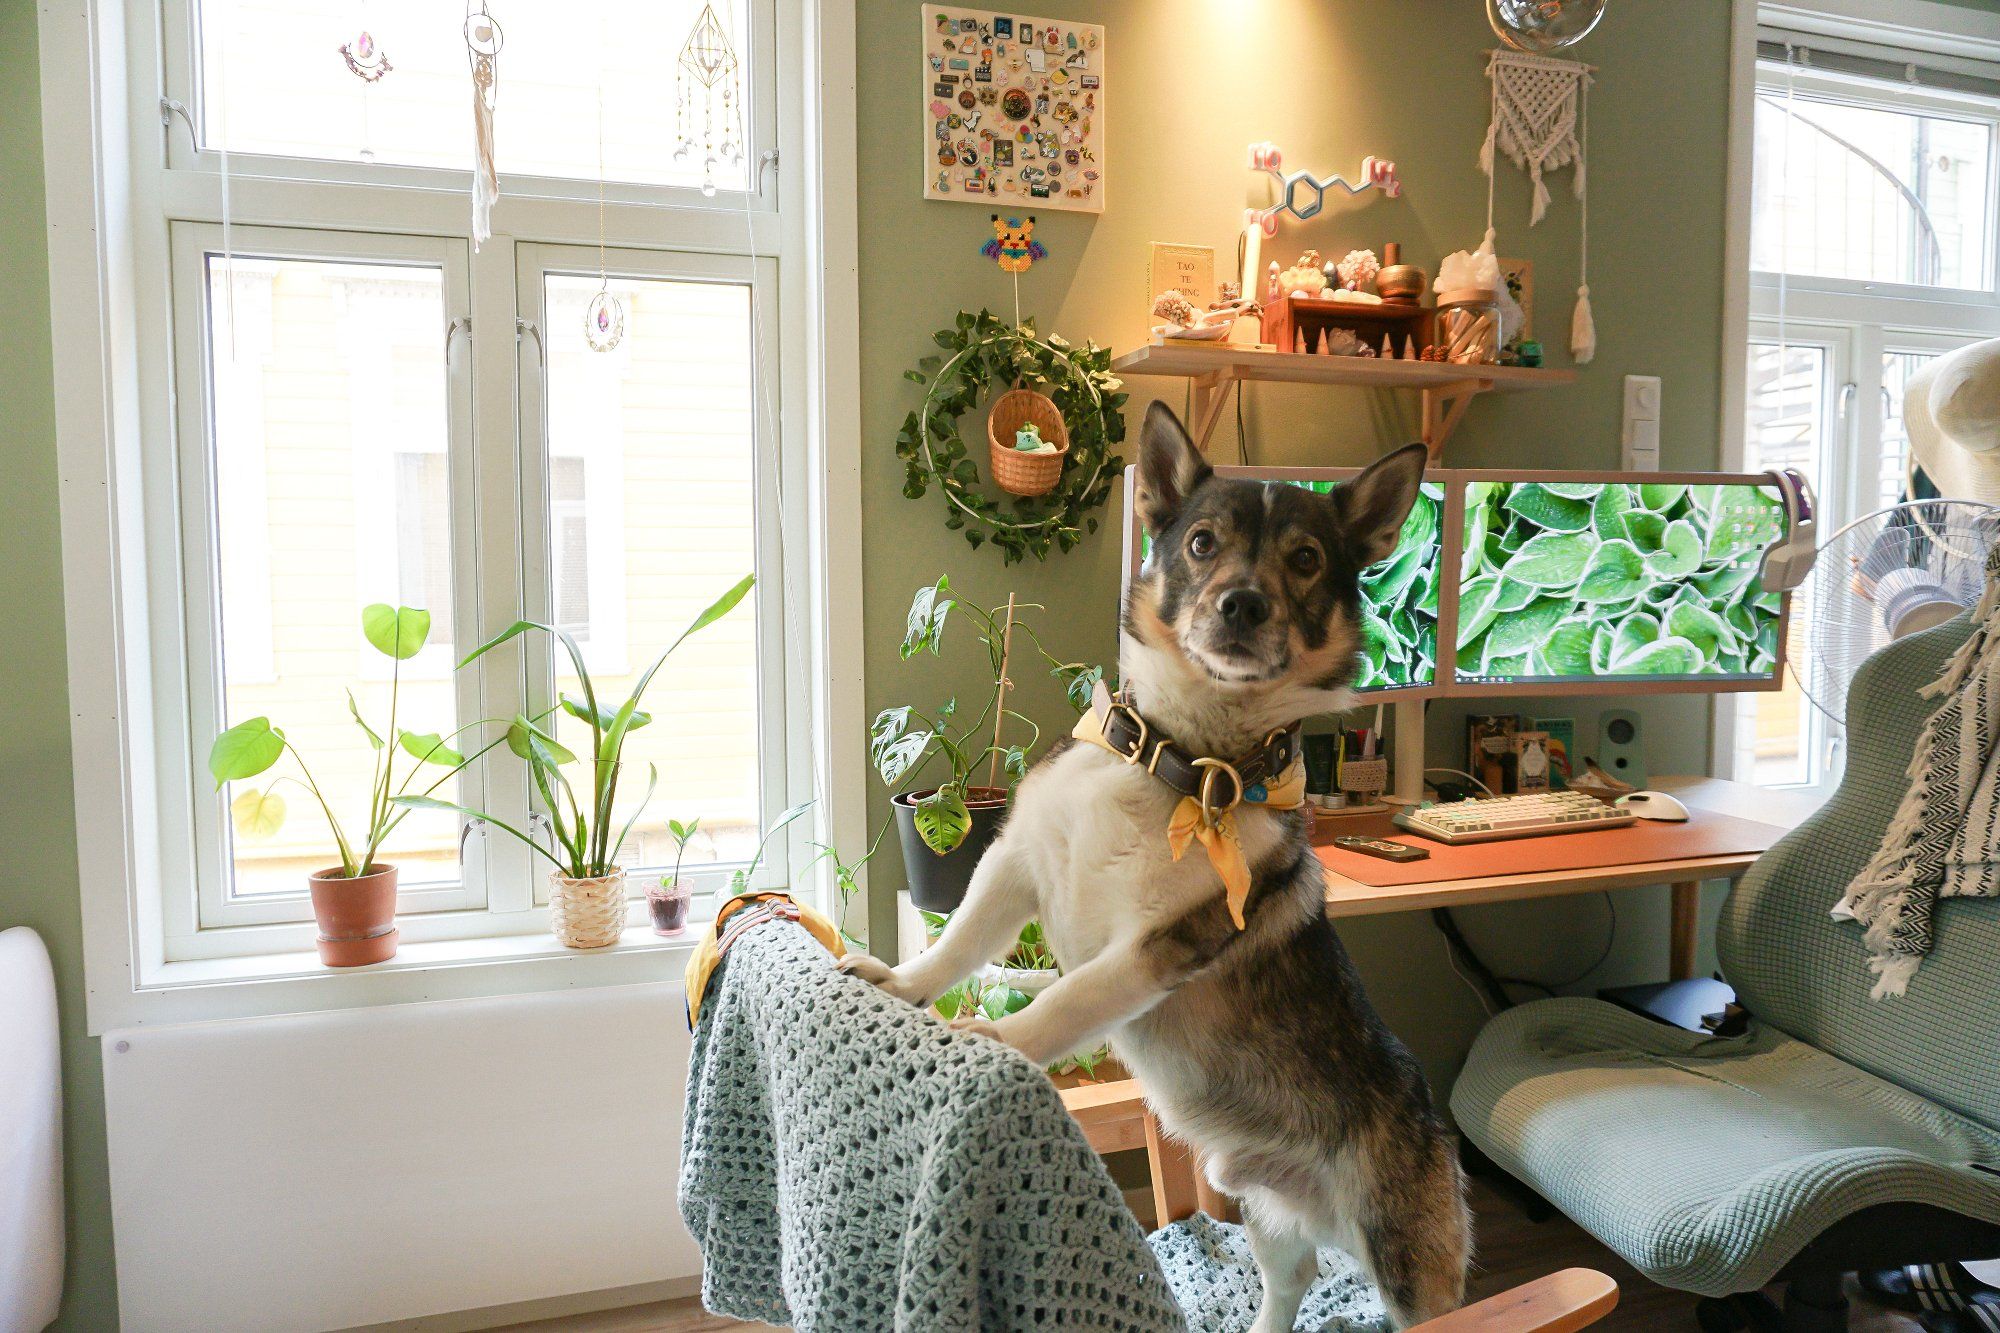 Atlas the dog being a good boy at his owner’s calming and creative home workspace